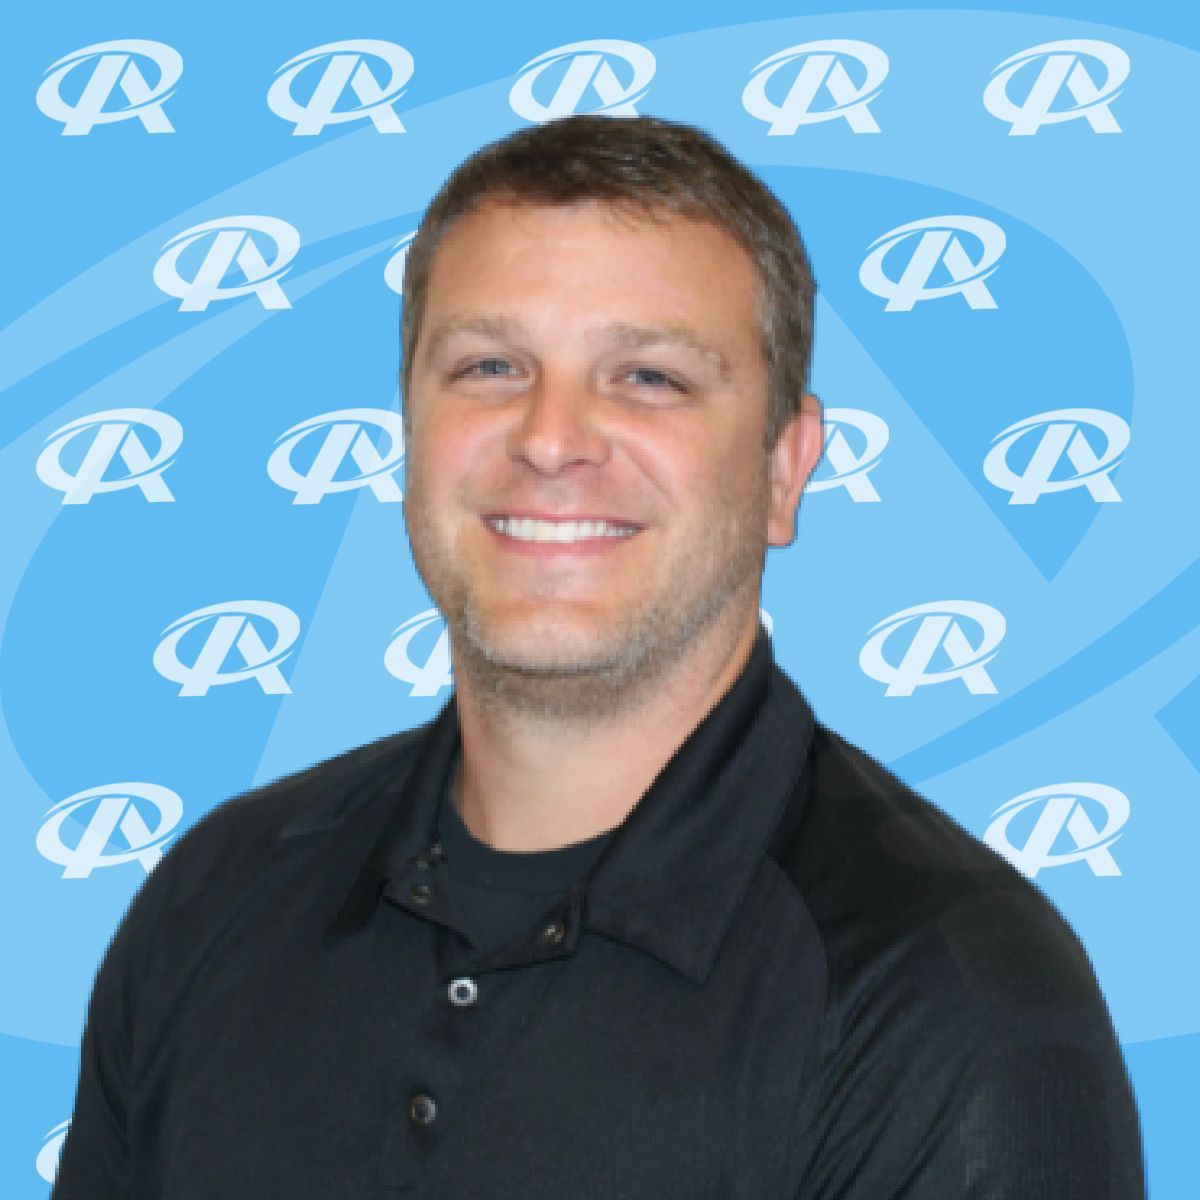 A man in a black shirt is smiling in front of a blue background with the letter r on it